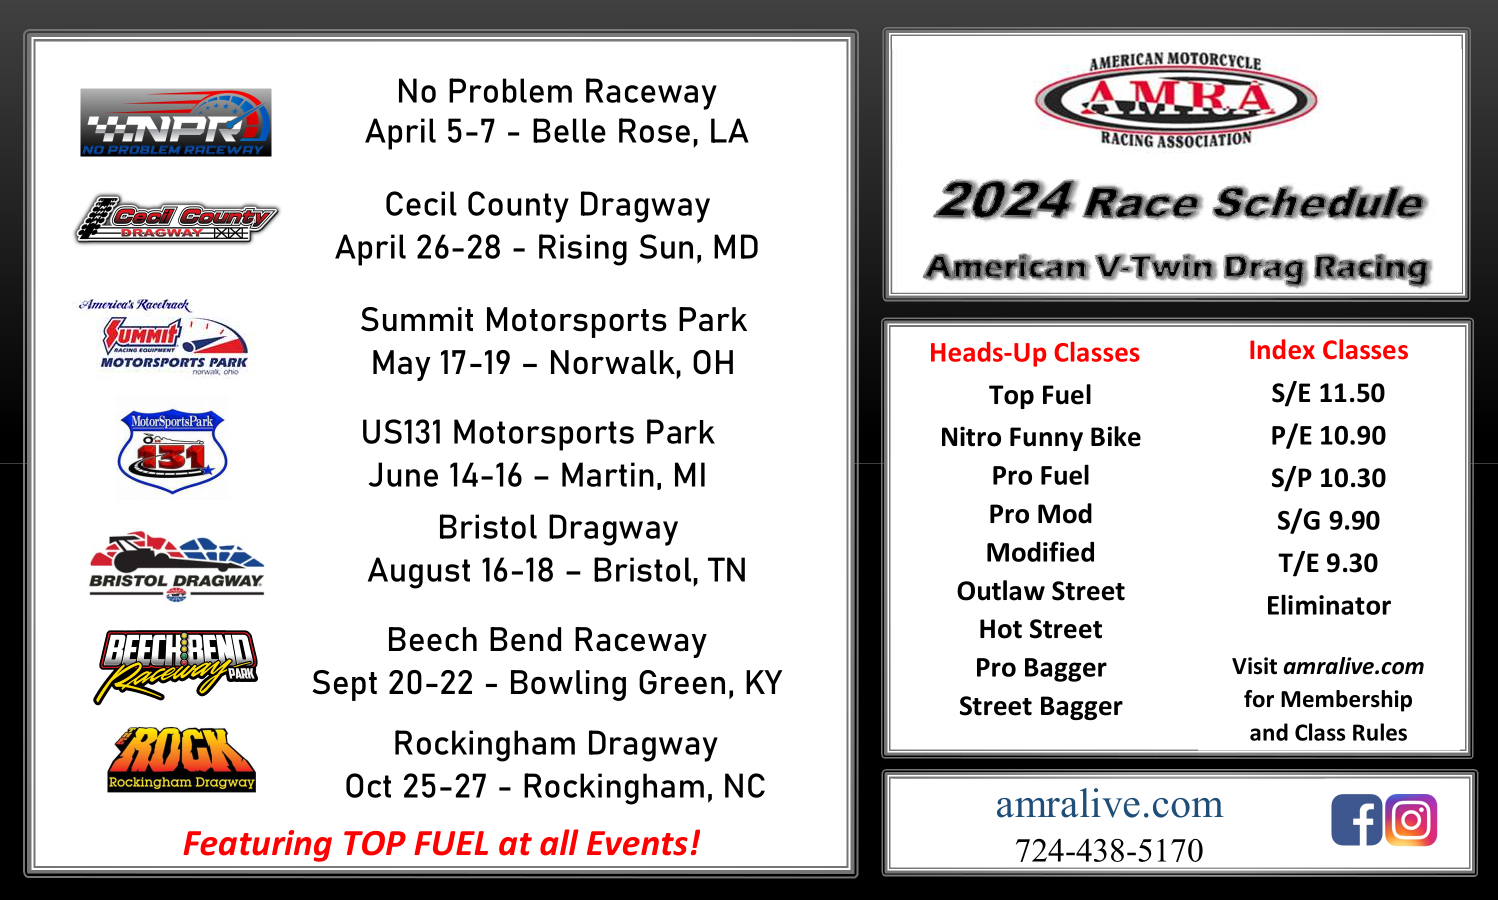 A poster of the 2024 American V-Twin Drag Racing schedule.